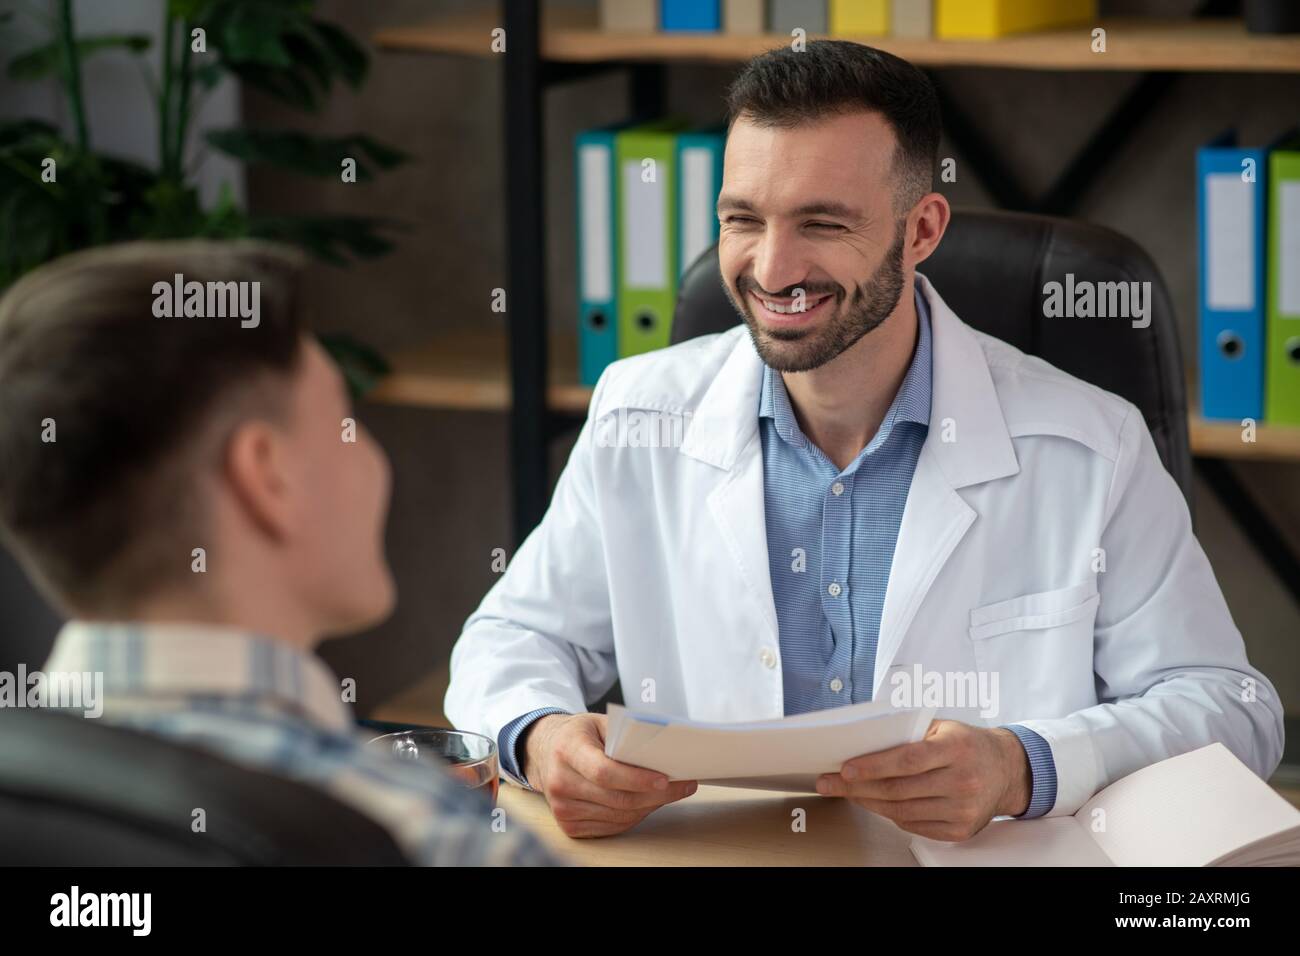 Dark-haired young doctor smiling friendly to his patient Stock Photo